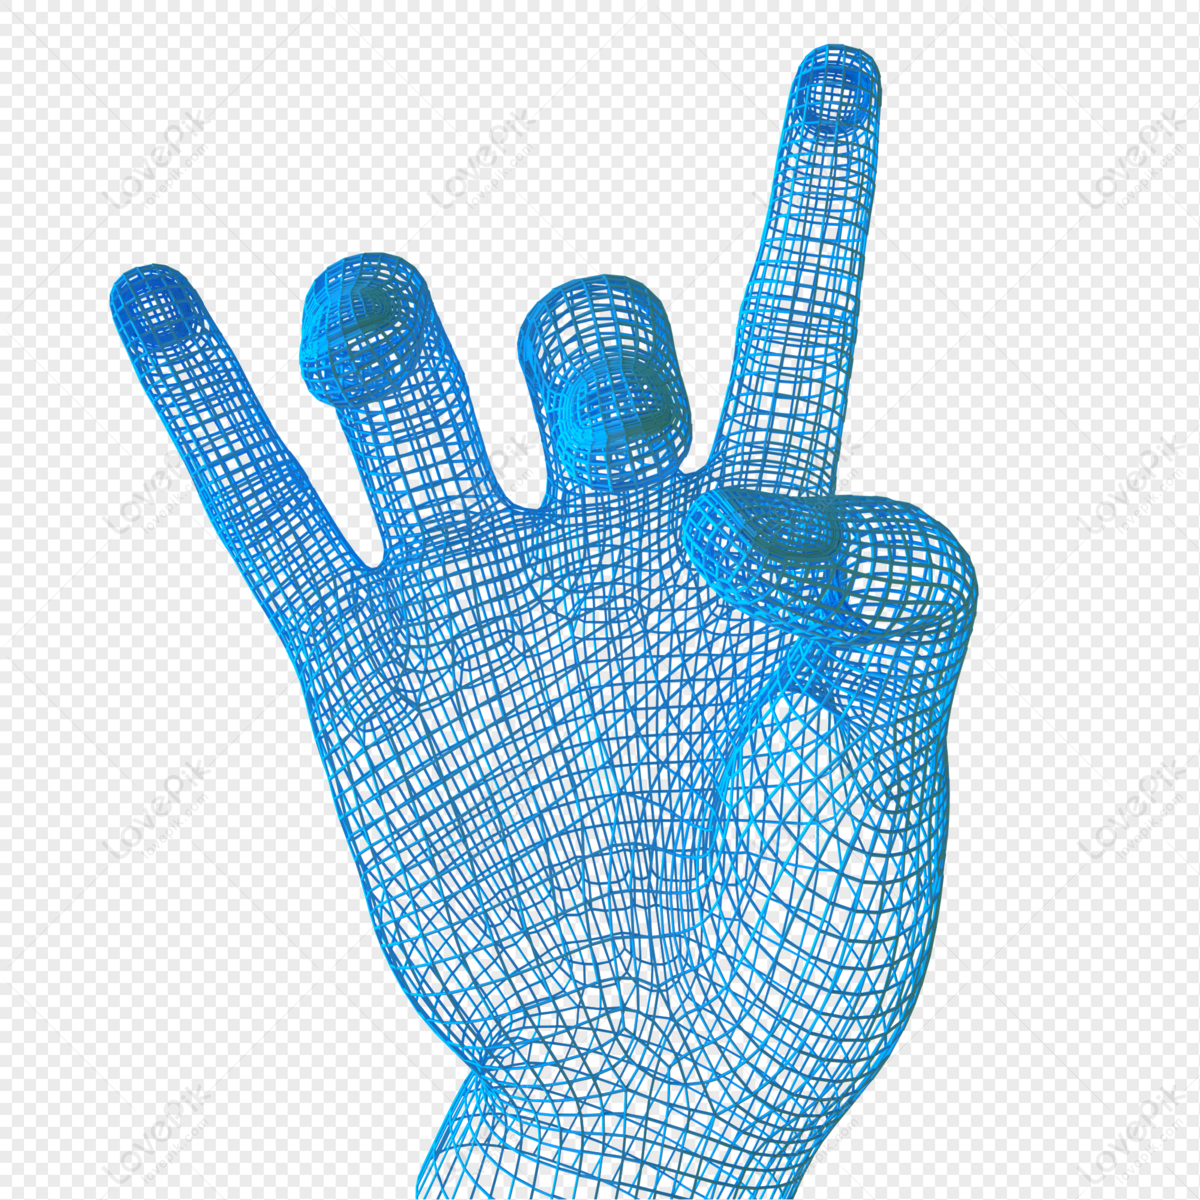 Lovepik Hand 3d Model Png Image 401627198 Wh1200 